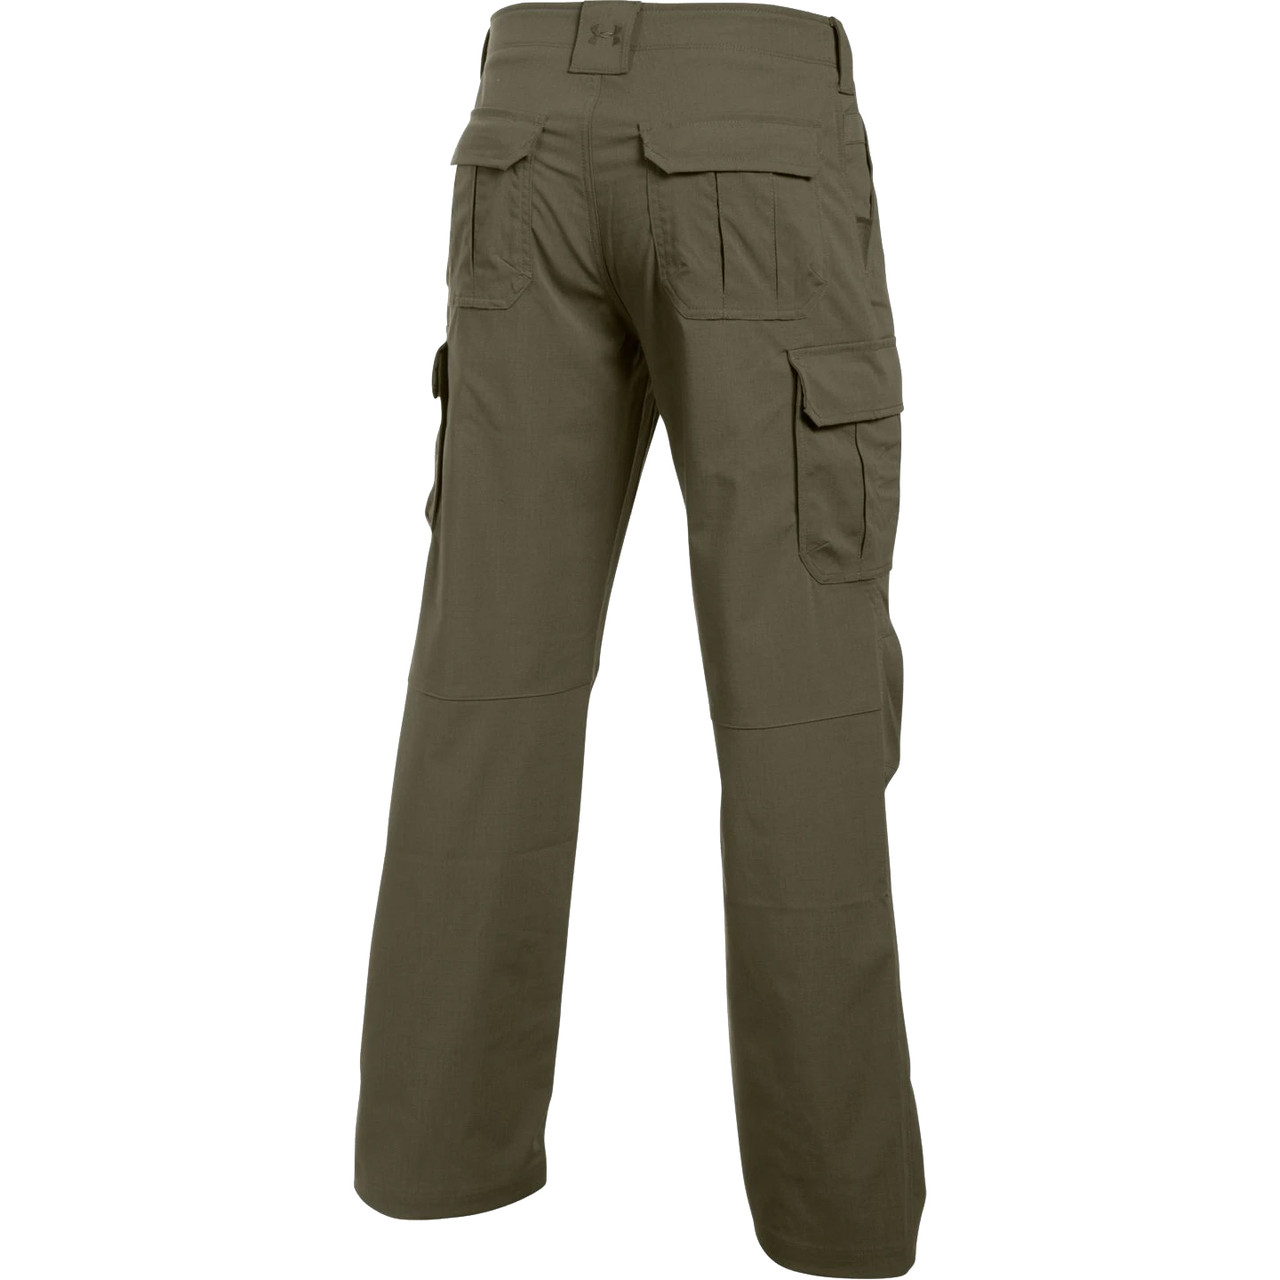 Under Armour Tactical Patrol Pants for Ladies